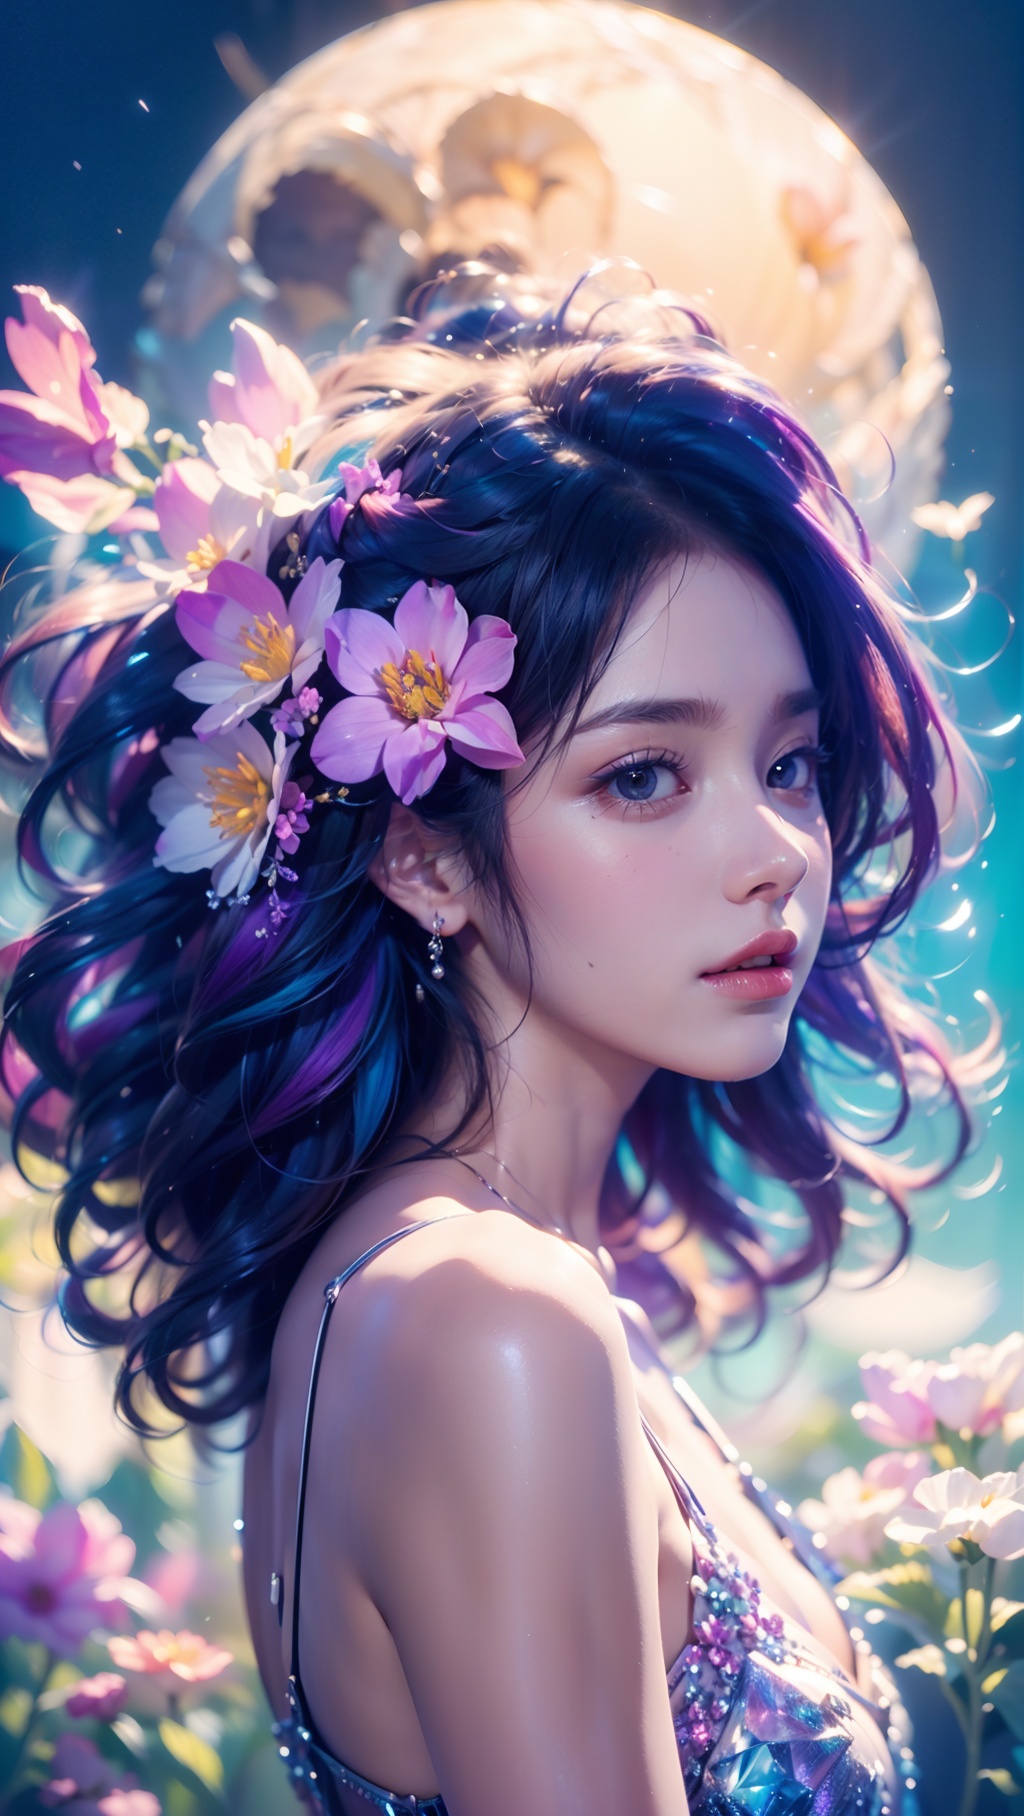 1 girl, Purple hair, (brown eyes), (extremely exquisite and beautiful), ((Purple and blue clothes)),meteor, meteor shower, (super large moon), (blue moon), comet, flower sea, many flowers, flower sea facing the audience, front, butterflies, hair, butterfly, f, dreamy light, (8k, RAW photo, best quality, masterpiece: 1.2), (realistic, photo fidelity: 1.3), ultra fine, ultra fine cg 8k wallpaper, (crystal textured skin: 1.2), 1girl, Crystal Girl, Colored hair